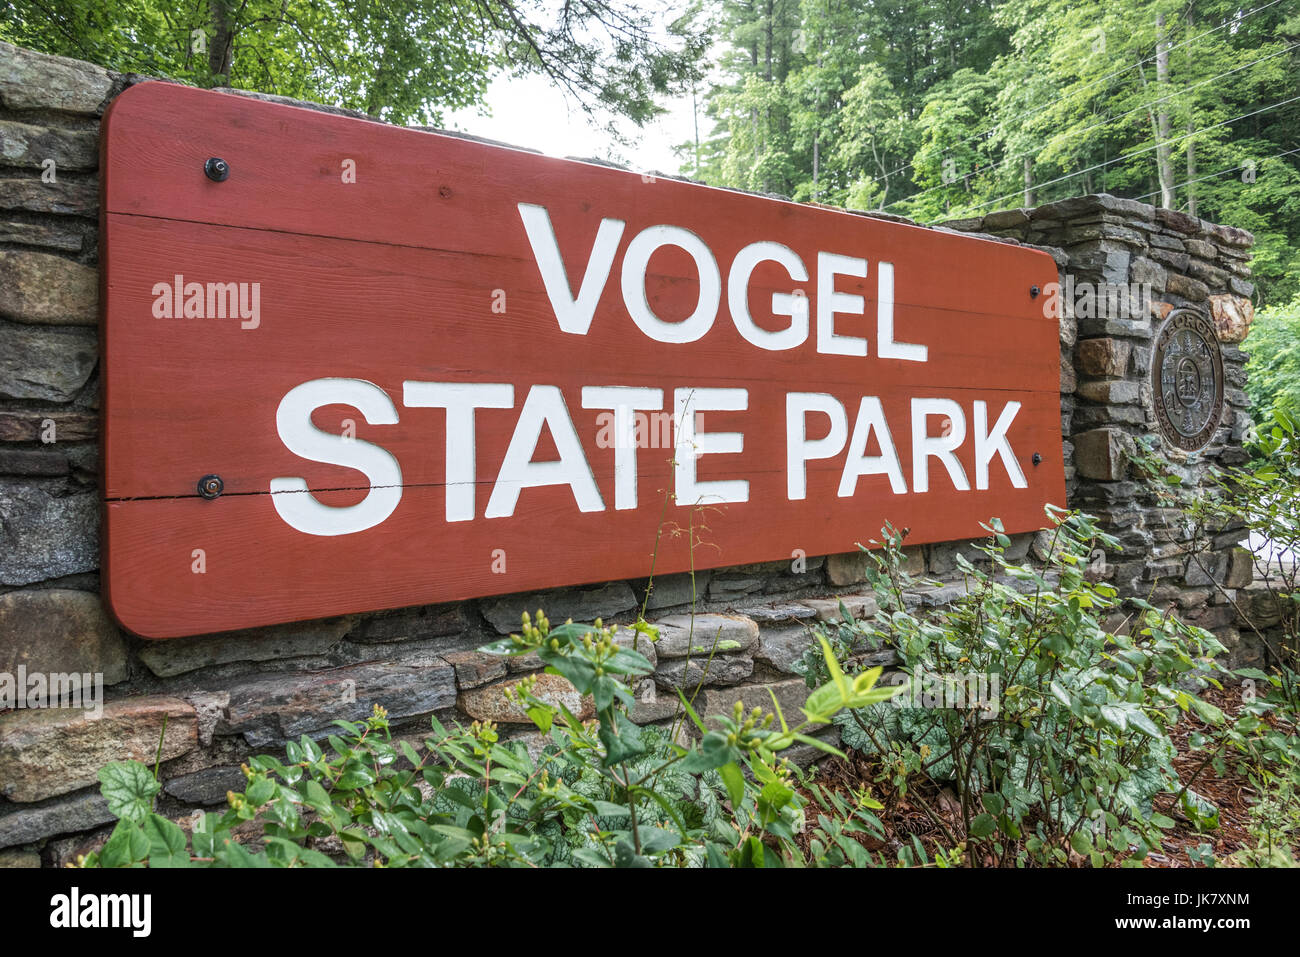 Wood and stone entrance sign for Vogel State Park, a popular Georgia State Park nestled in a high elevation valley of the Blue Ridge Mountains. Stock Photo